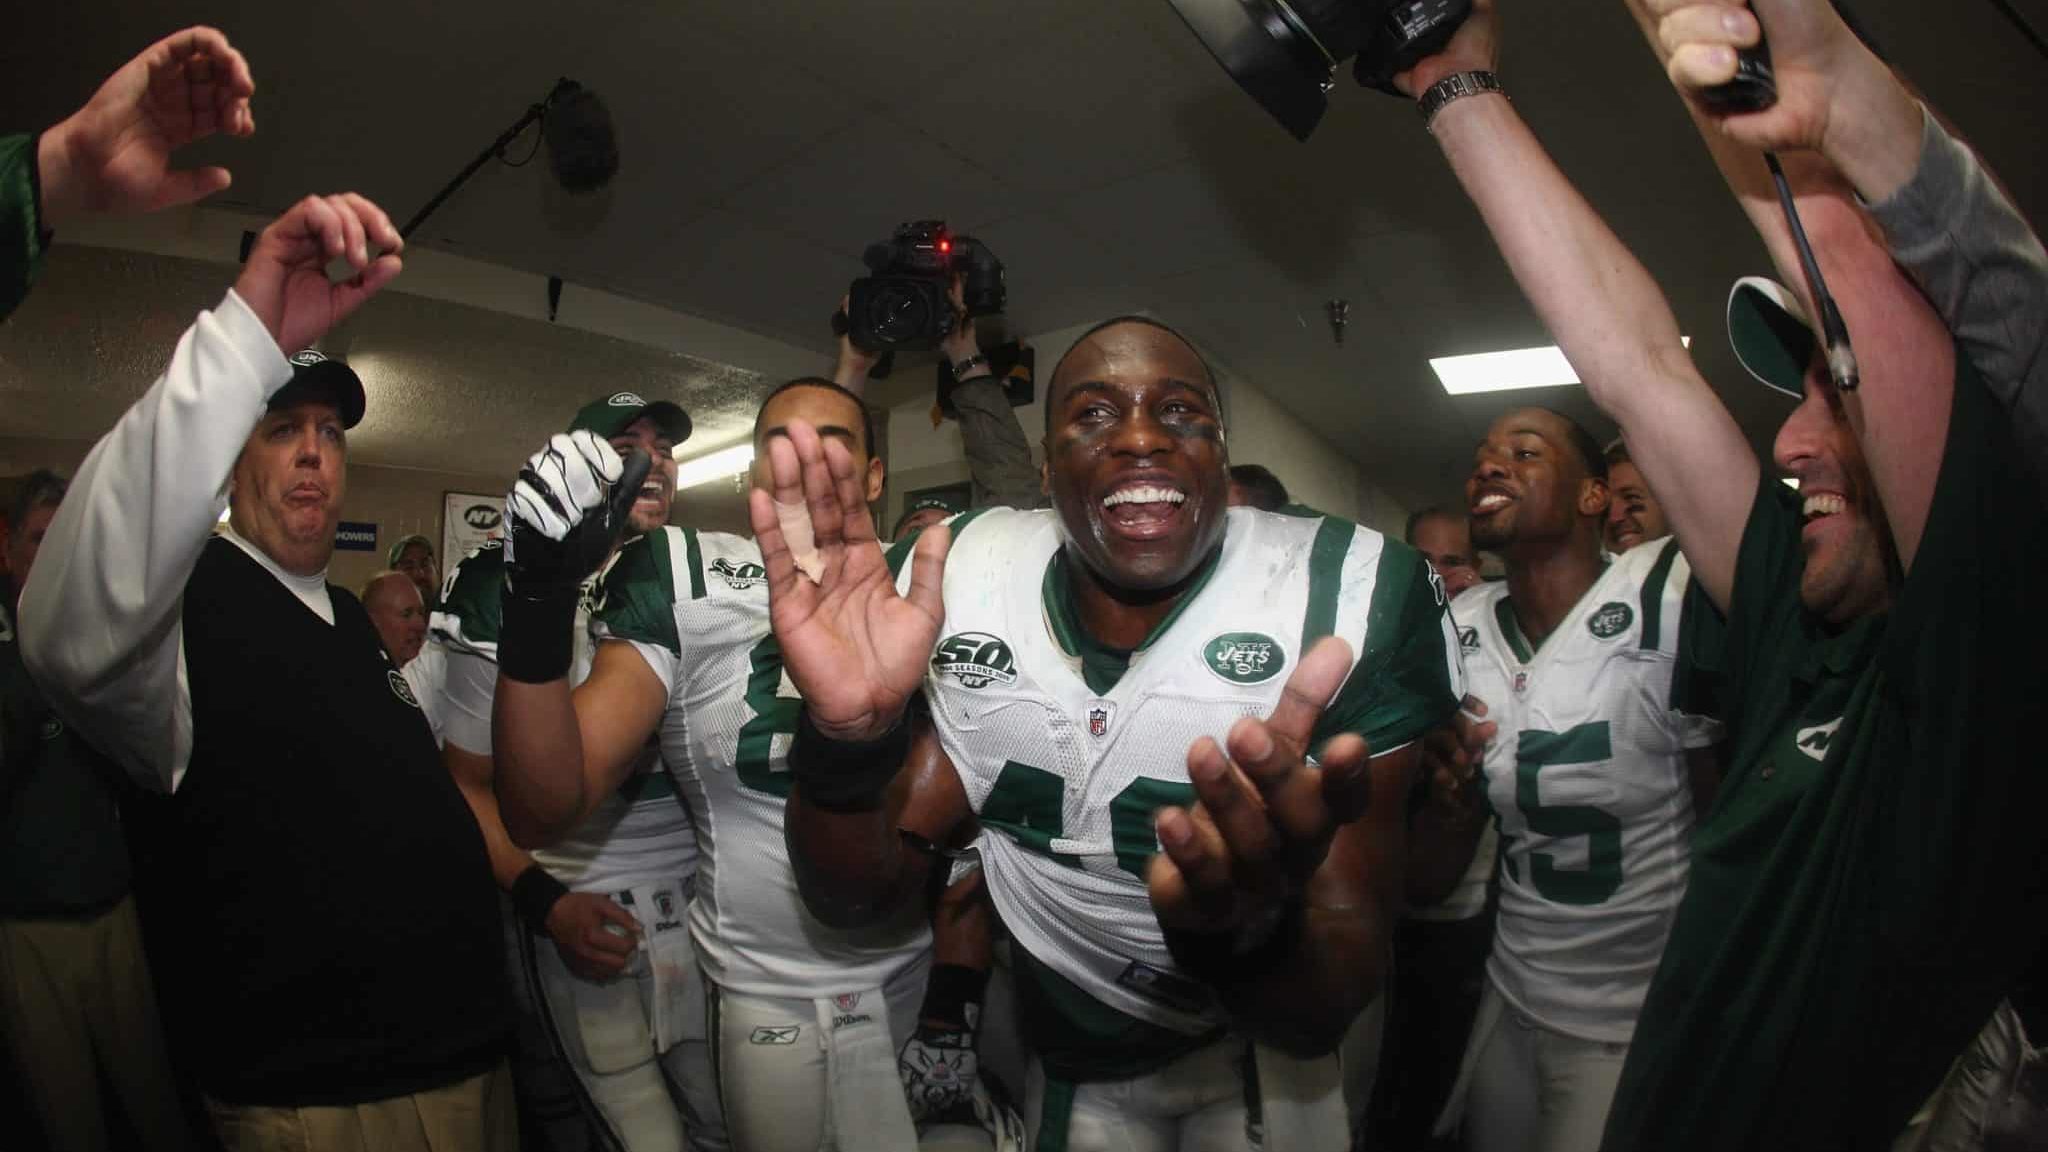 SAN DIEGO - JANUARY 17: Fullback Tony Richardson #49 of the New York Jets celebrates the victory against the San Diego Chargers when the Chargers host the Jets in the Divisional Playoffs at Qualcomm Stadium on January 17, 2010 in San Diego, California. The Jets defeated the Chargers 17-14.